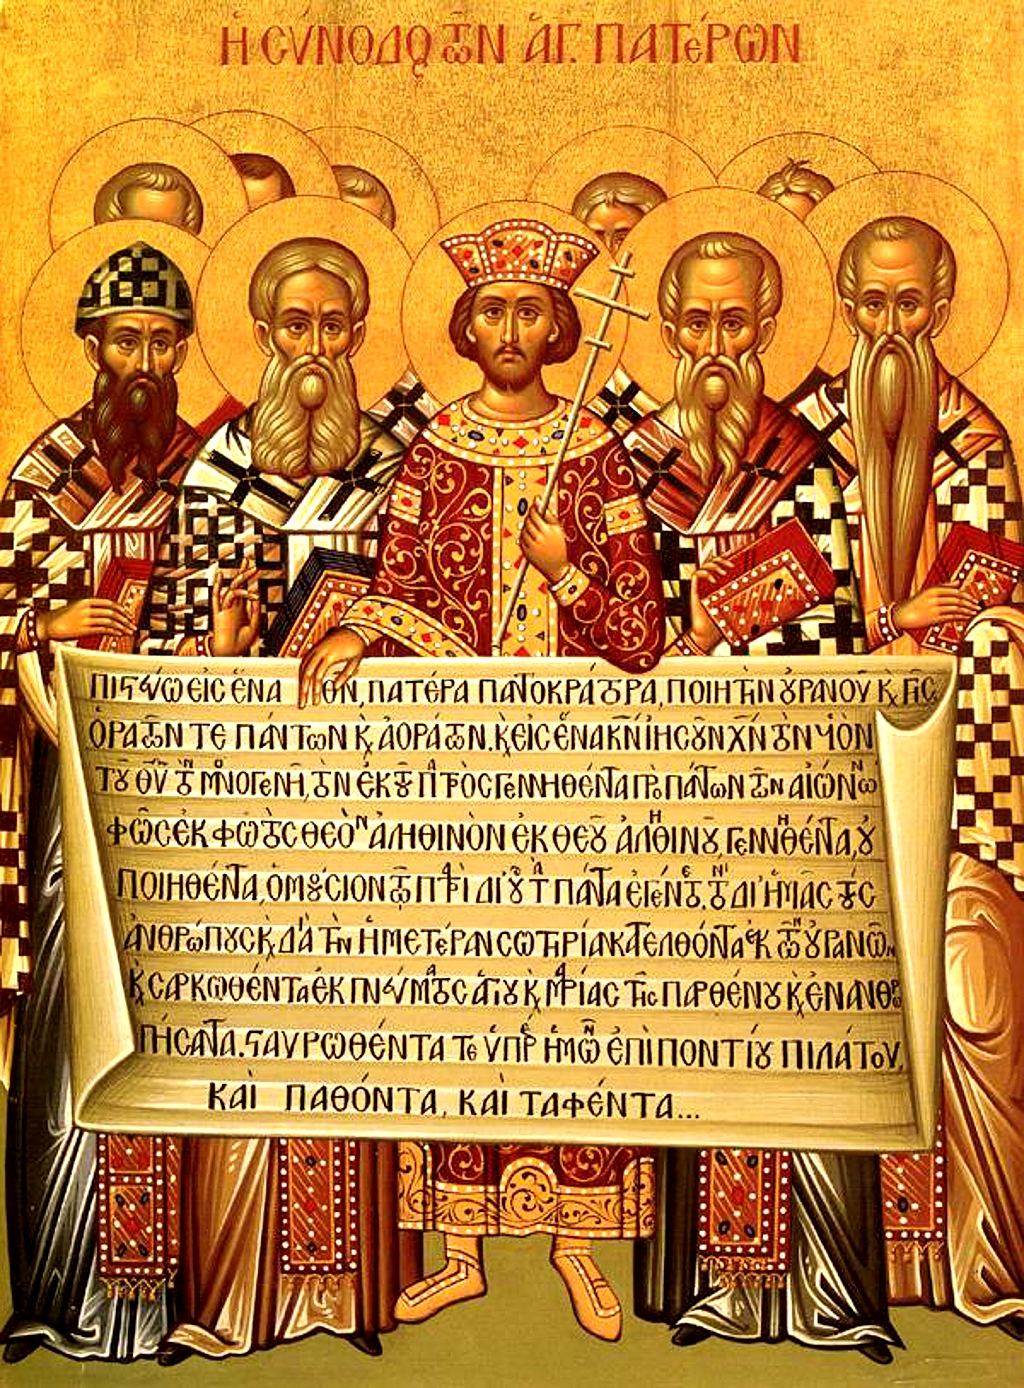 General 1024x1388 Christianity Nicene Creed Constantine The Great history artwork